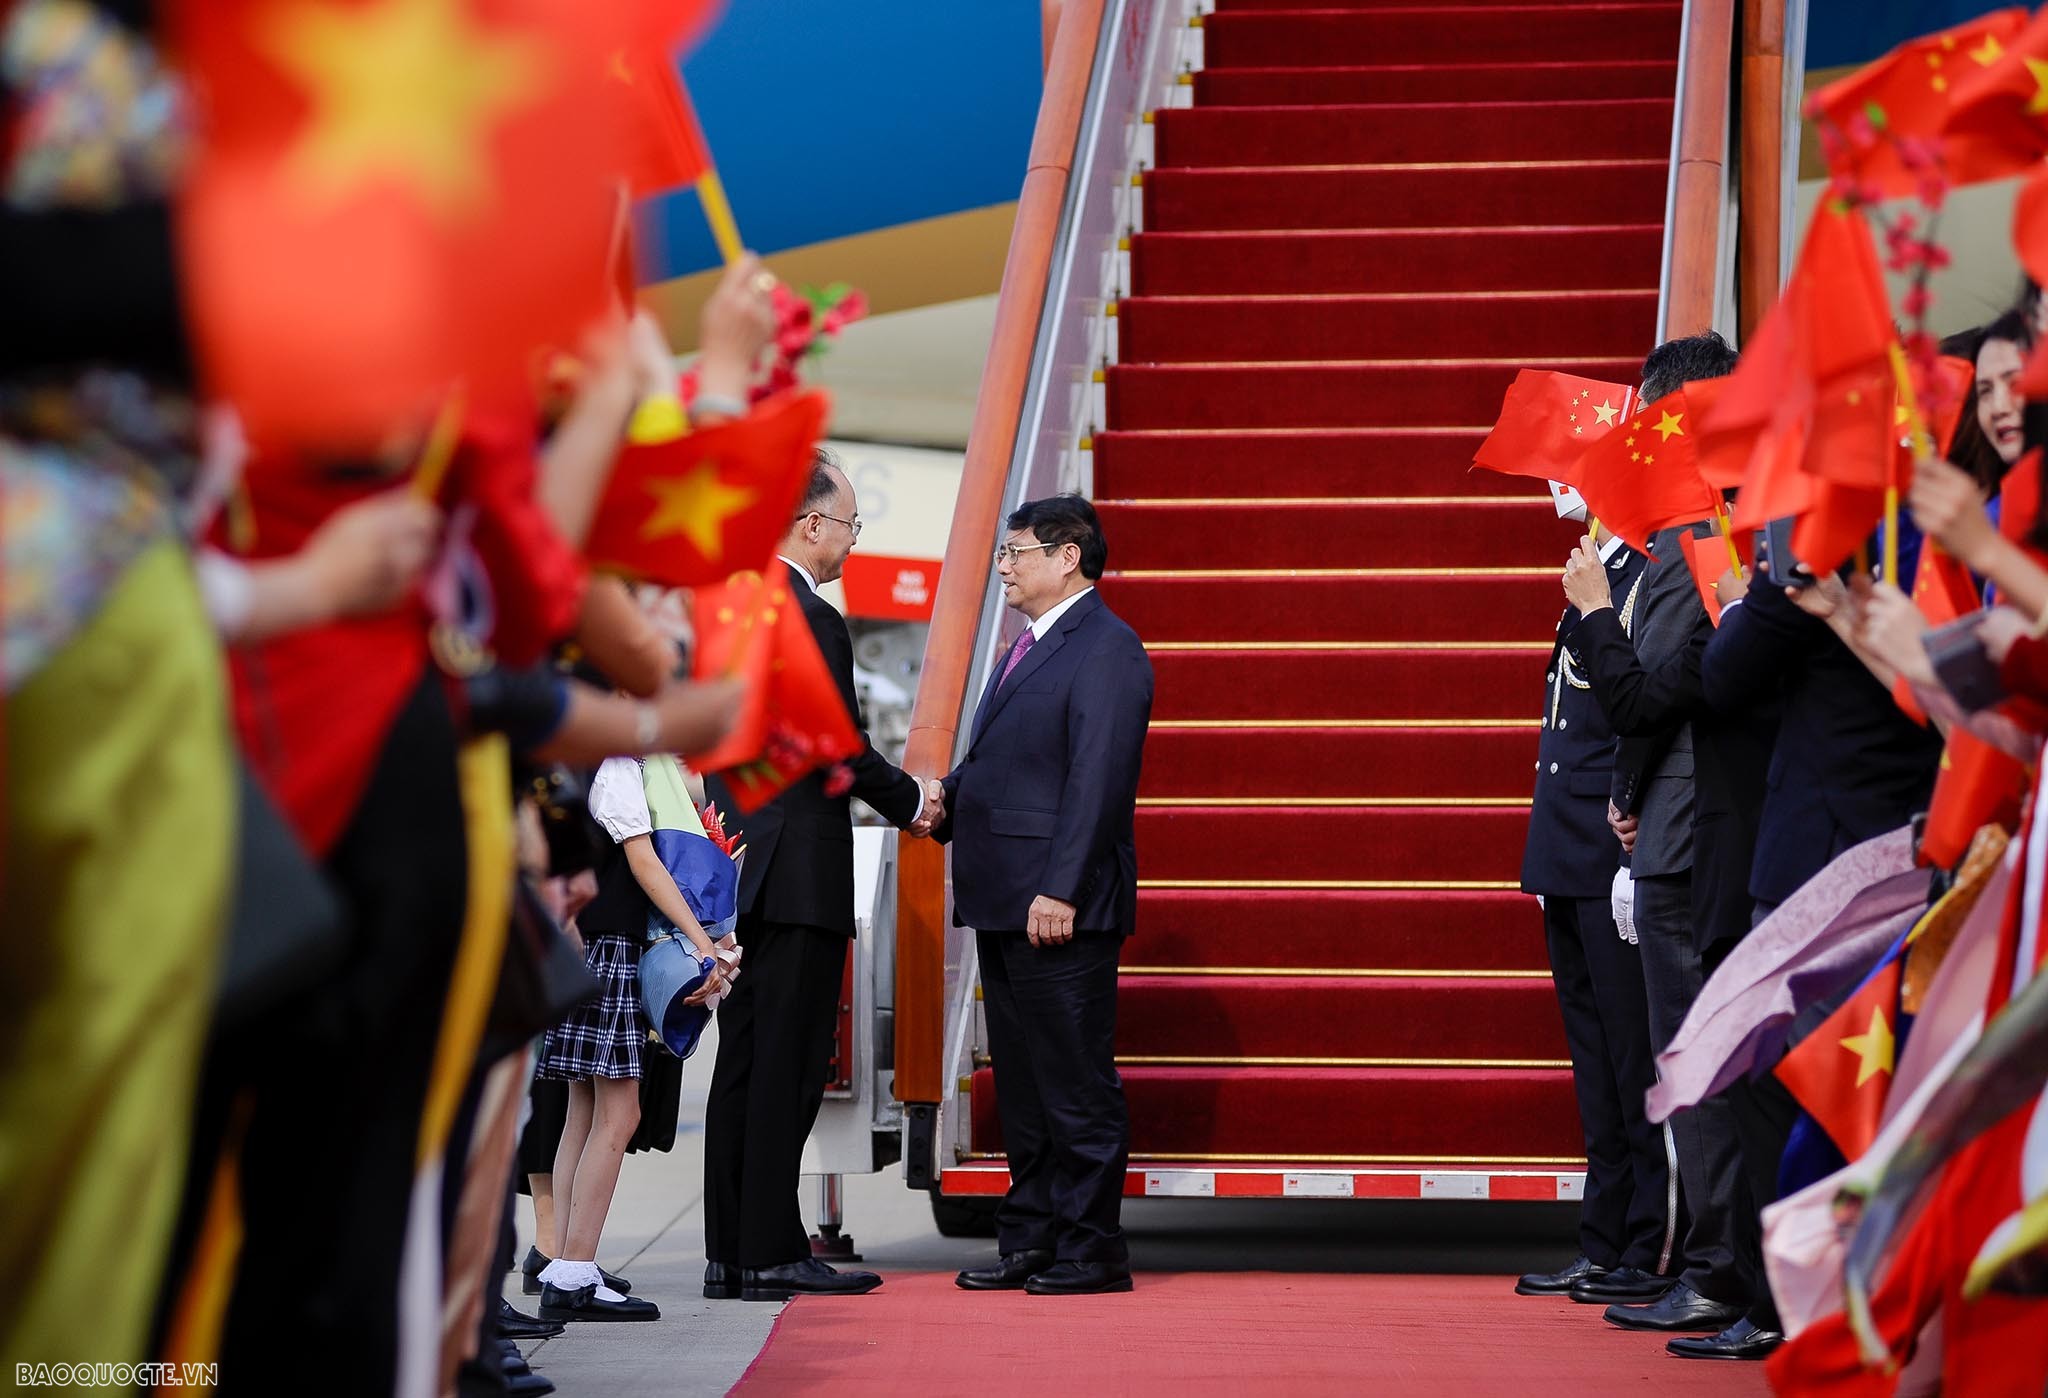 Prime Minister Pham Minh Chinh arrives in Beijing, starts official visit to China